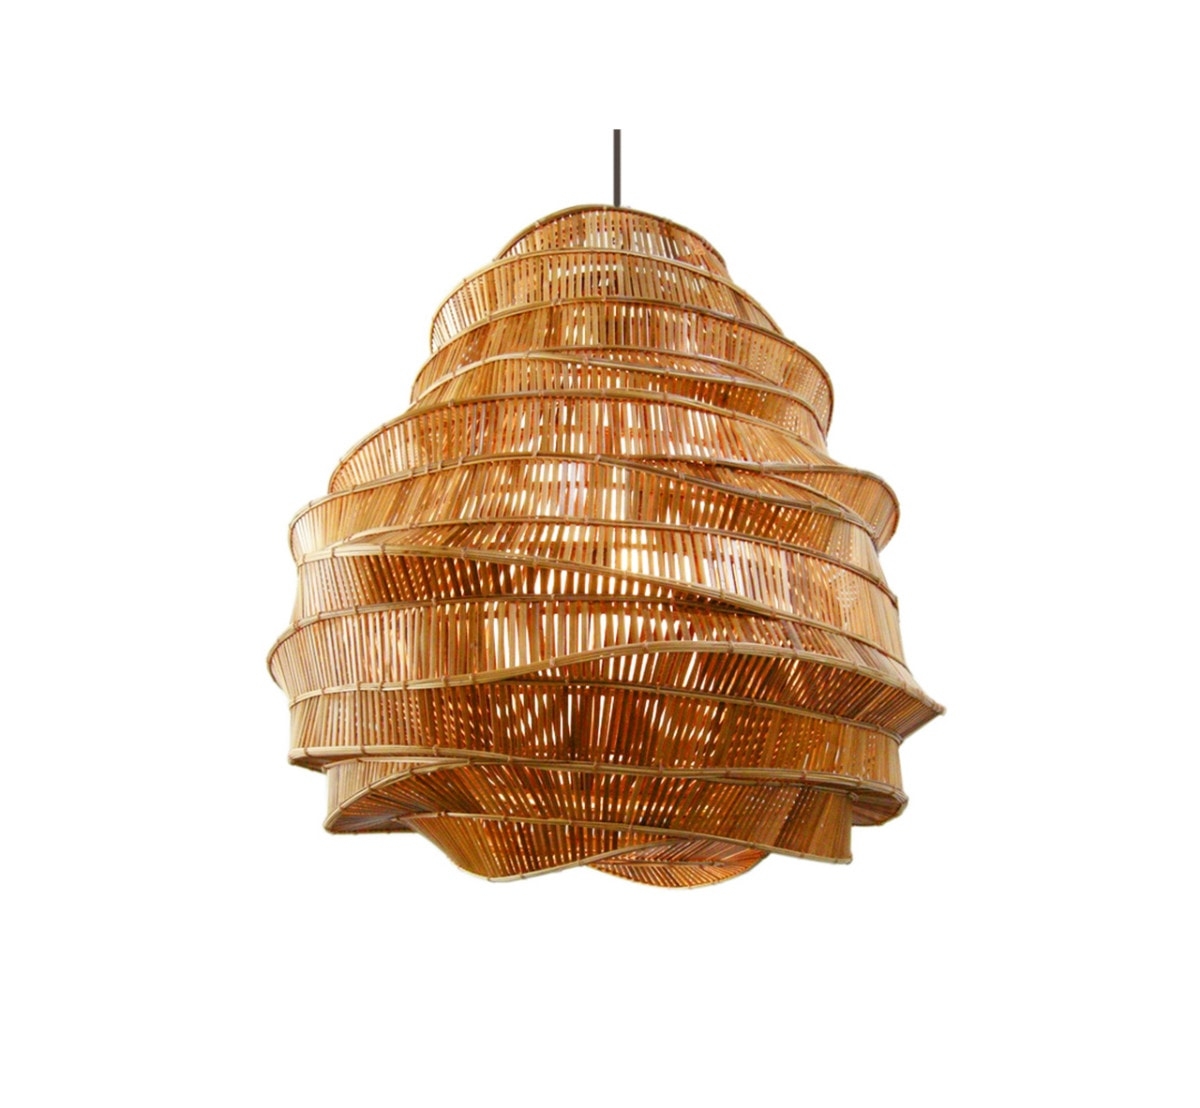 Woven lamps